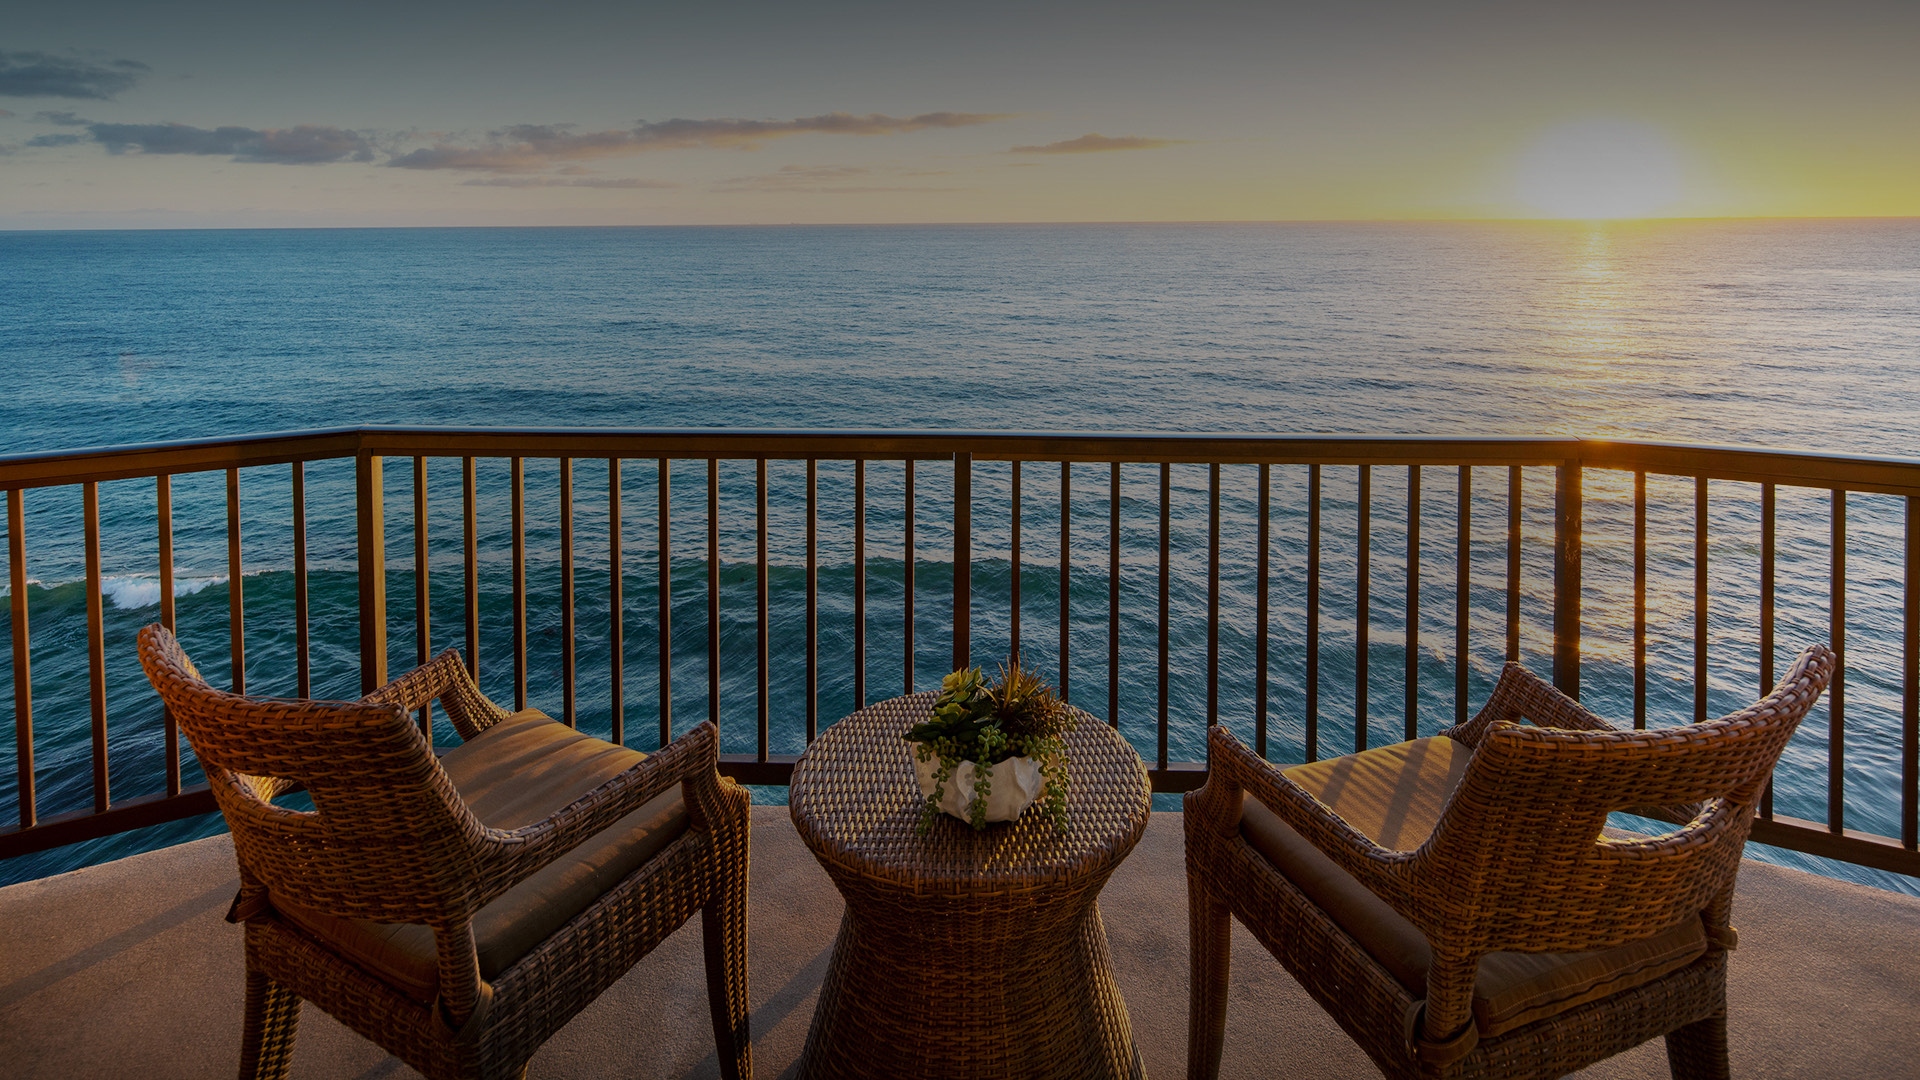 Two wicker chairs on a balcony overlooking the ocean